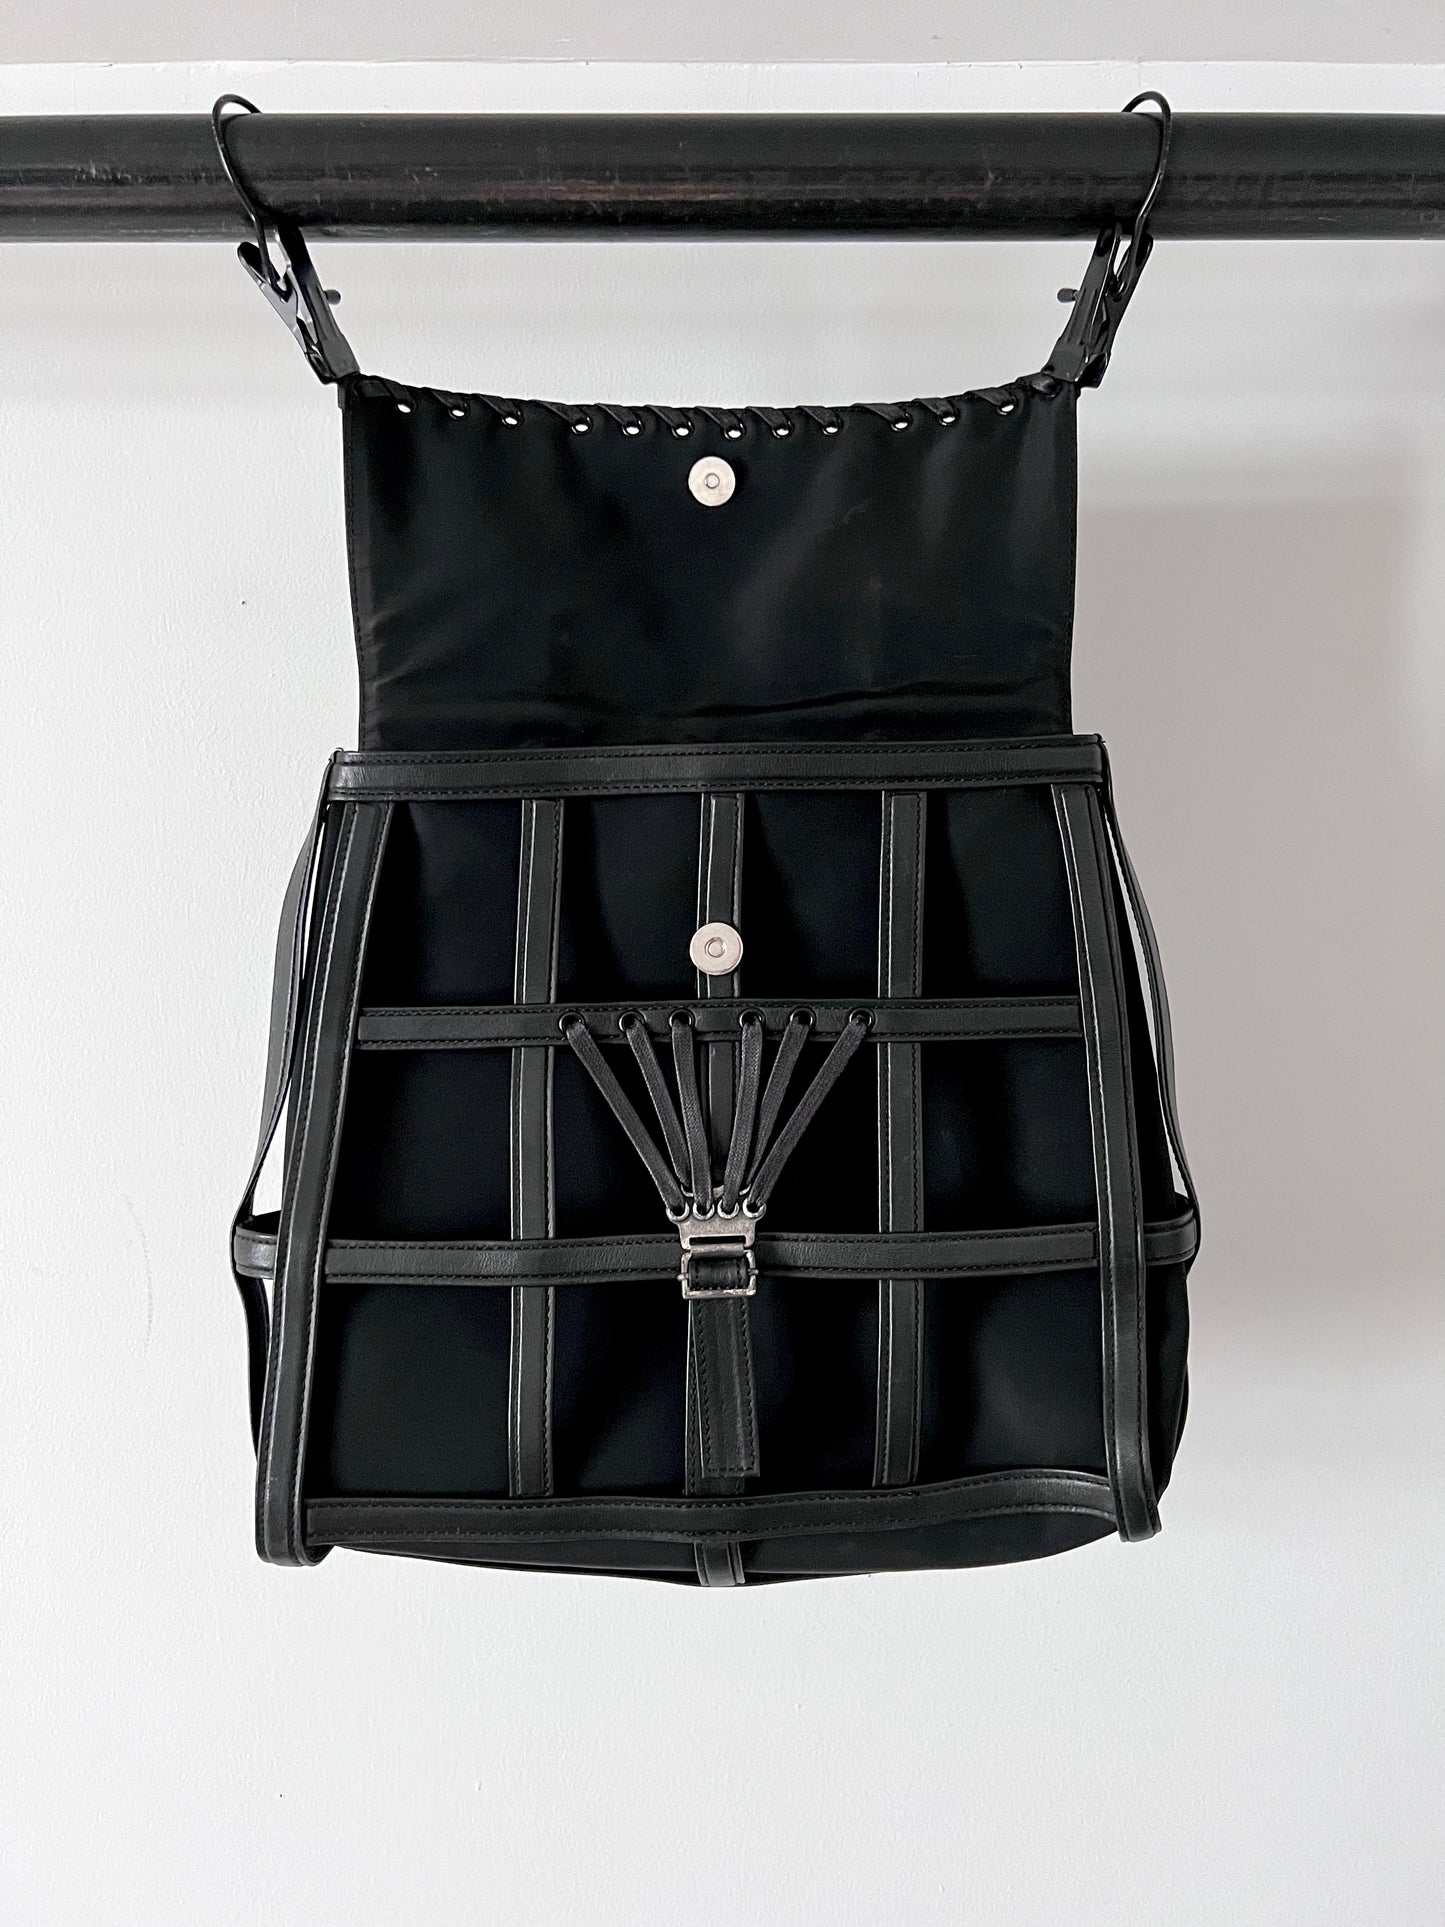 Jean Paul Gaultier Maroquinerie Cage Tote